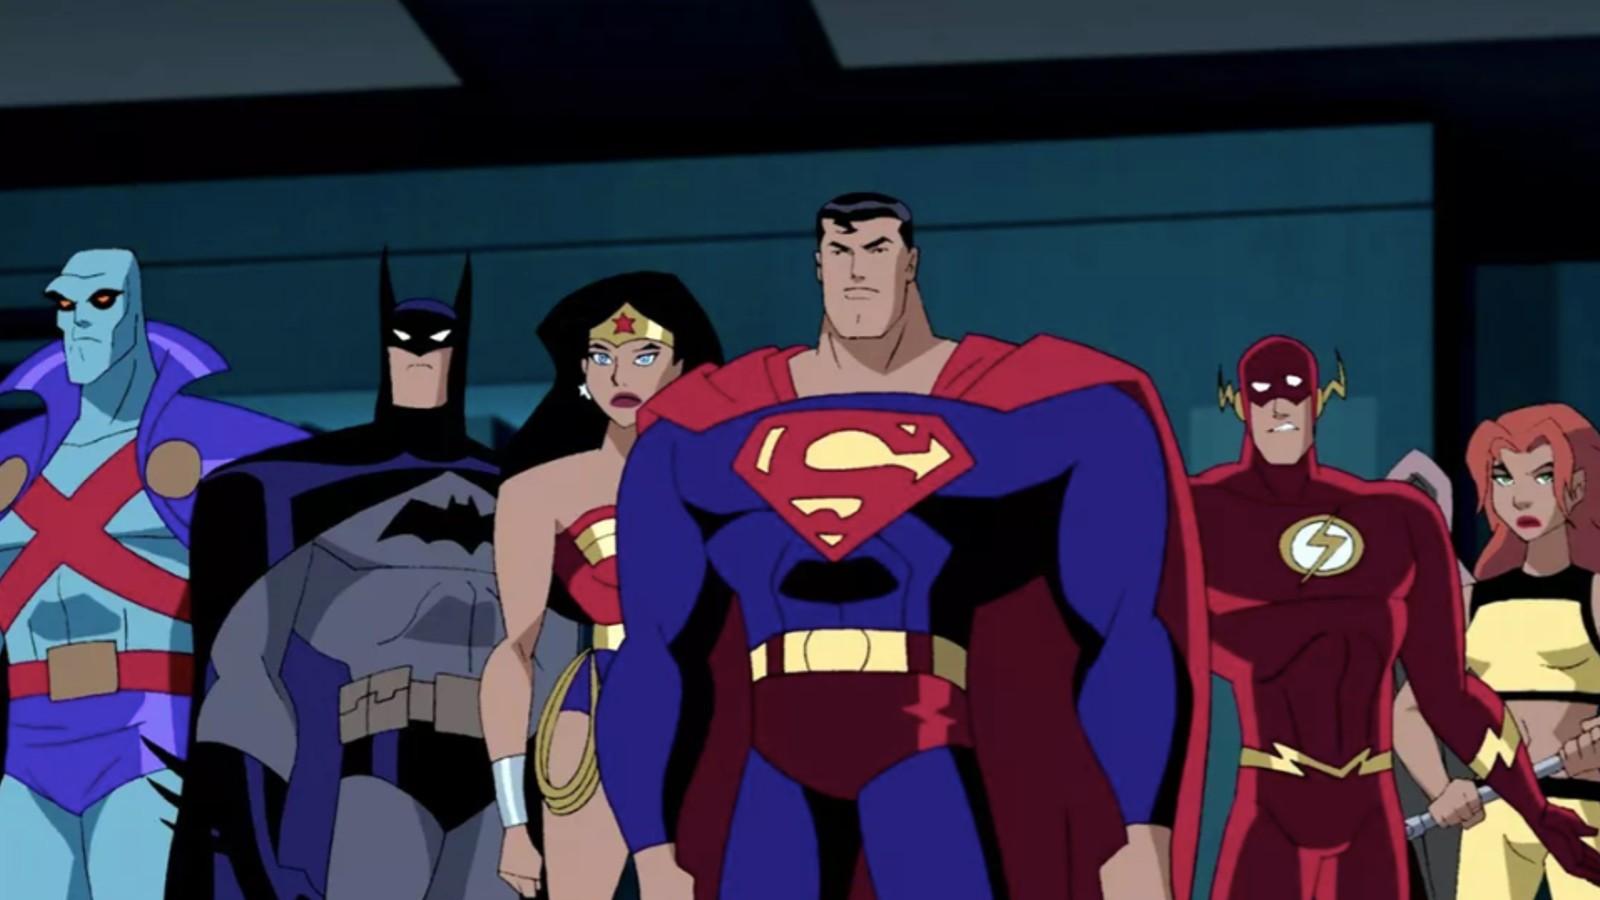 The animated Justice League